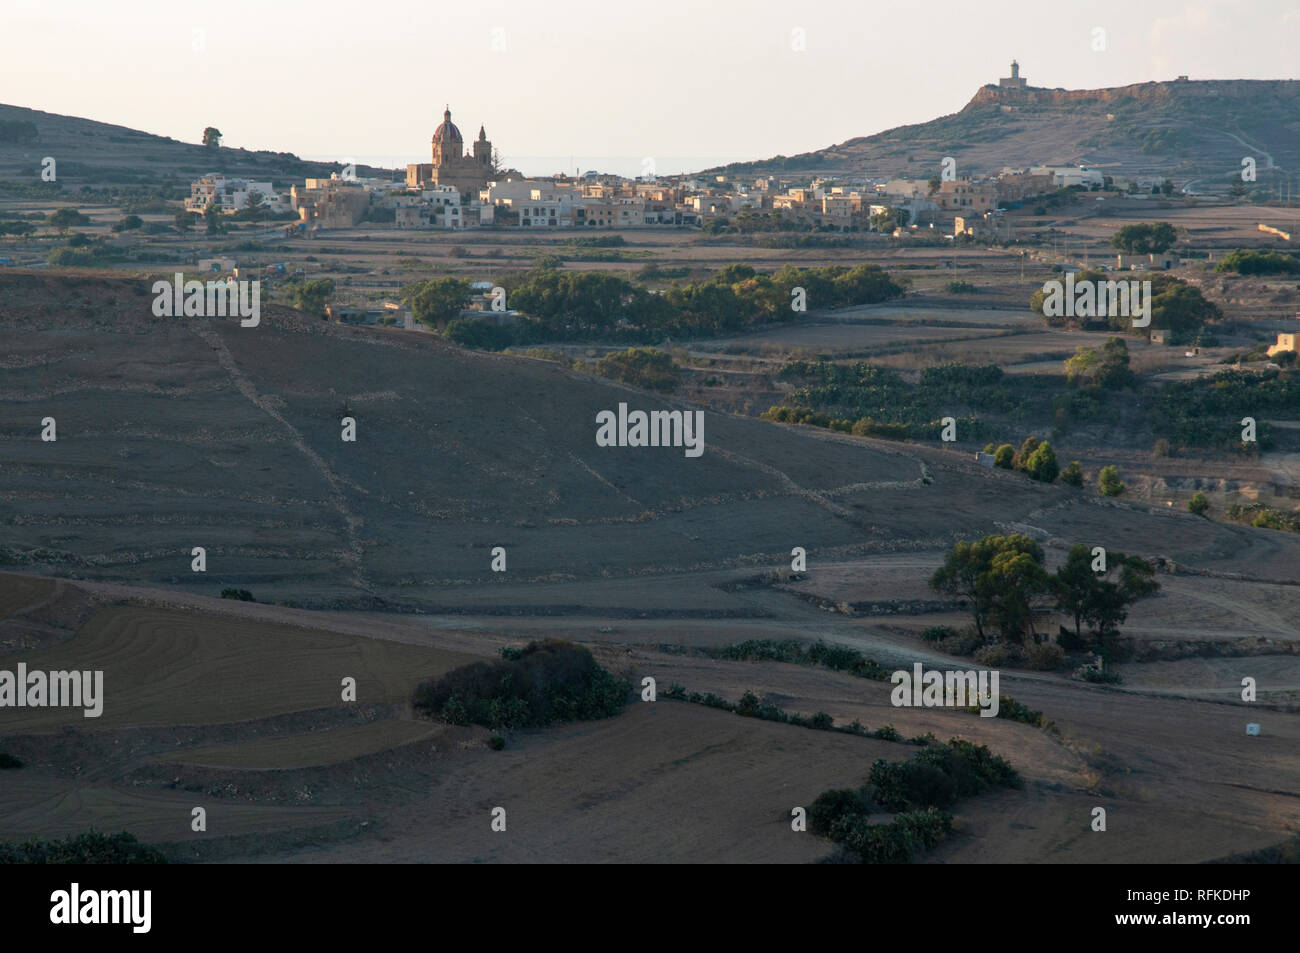 View to the village of Ghasri and the prominent landmark of Corpus Christi Church with surrounding landscape on Gozo in Malta. Shot from the Citadella. Stock Photo